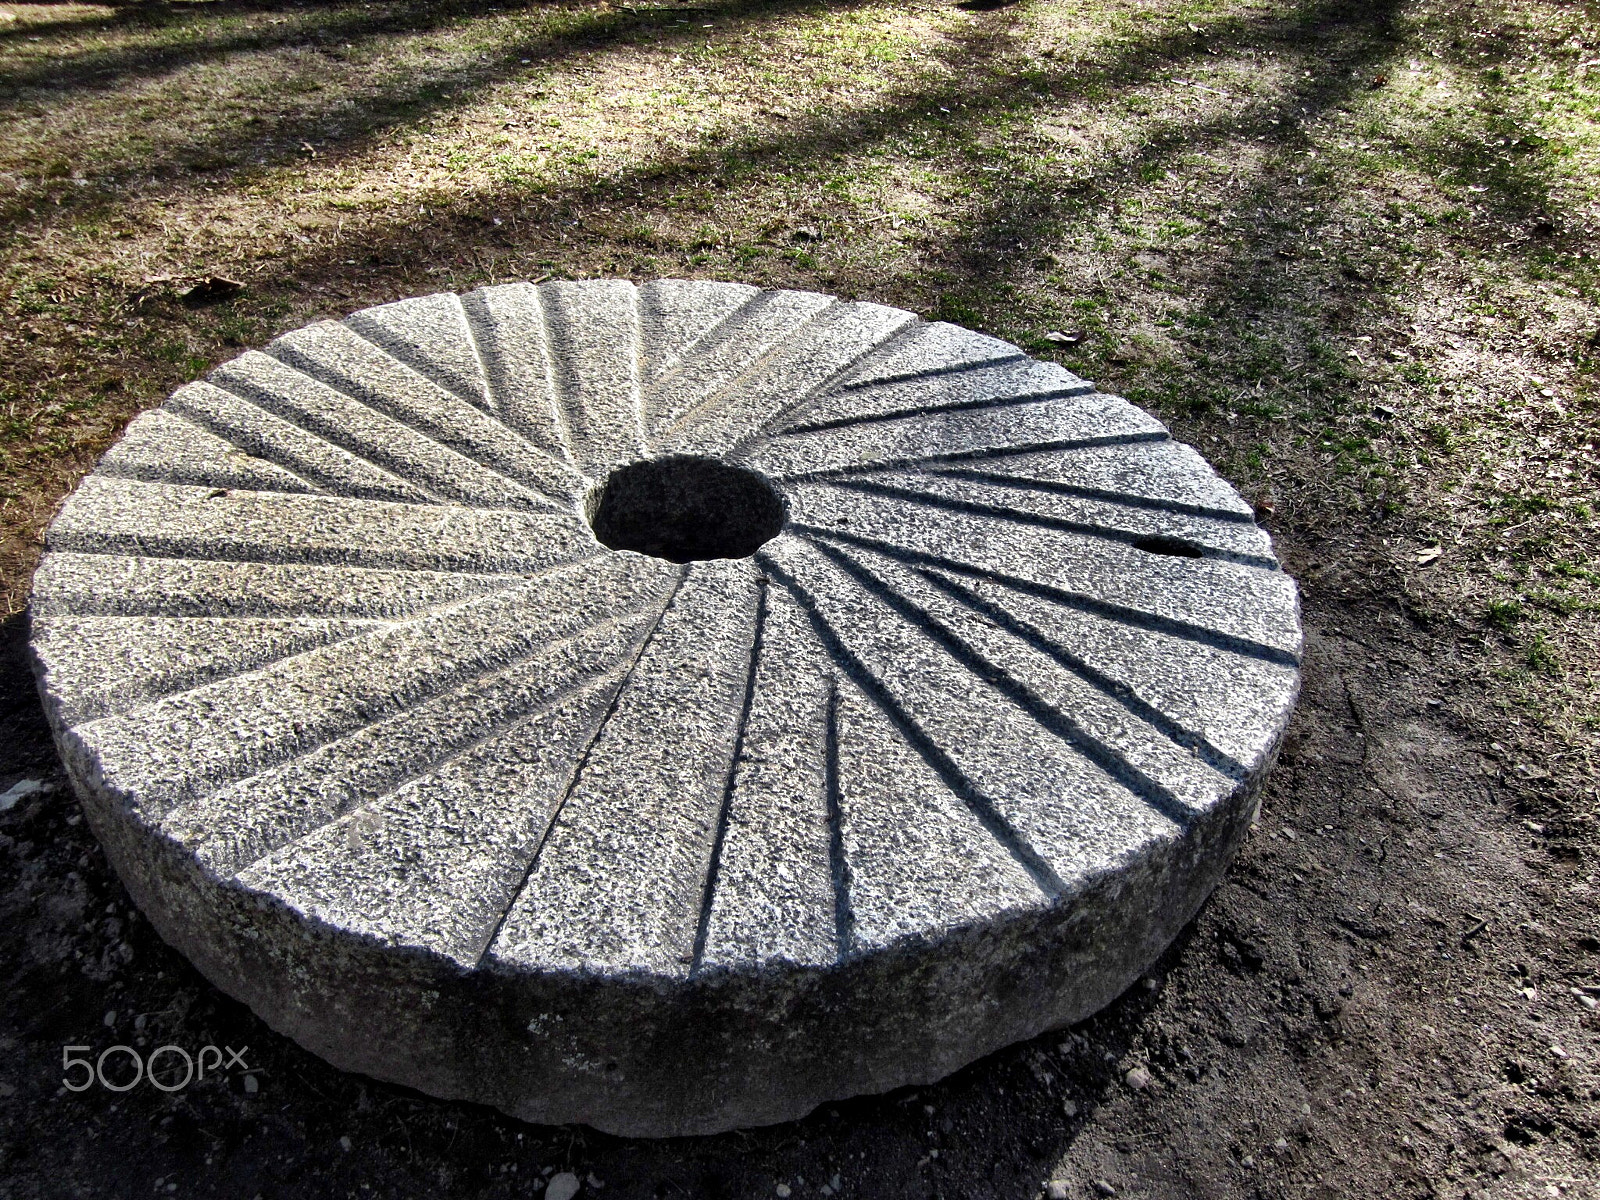 Canon PowerShot SD1300 IS (IXUS 105 / IXY 200F) sample photo. Old mill grindstone at wayside inn photography